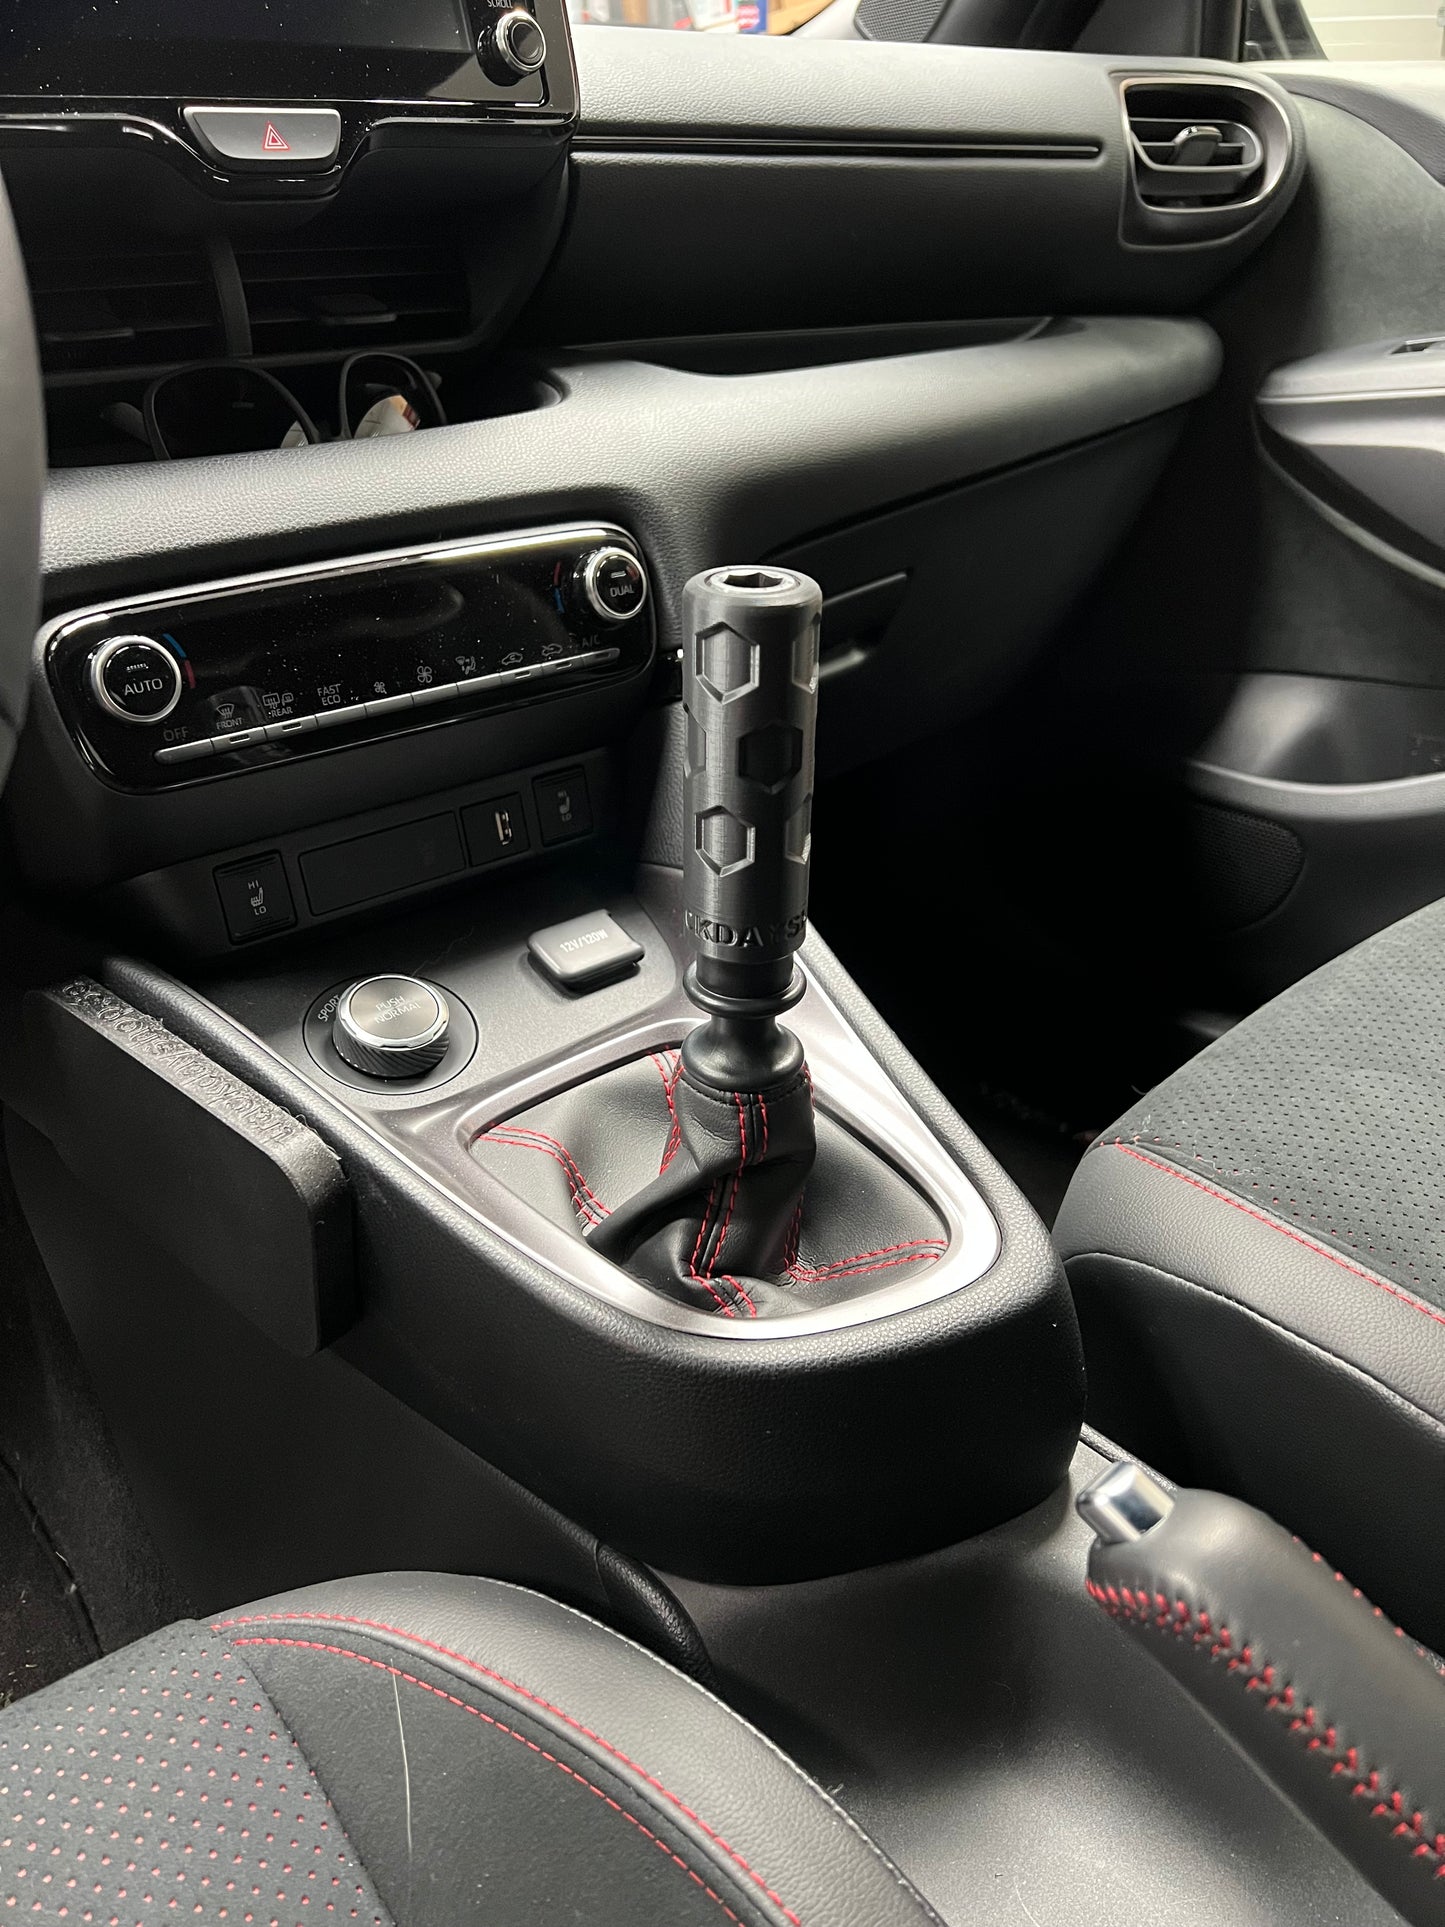 Simple shift knob with honeycomb pattern for Toyota GR Yaris